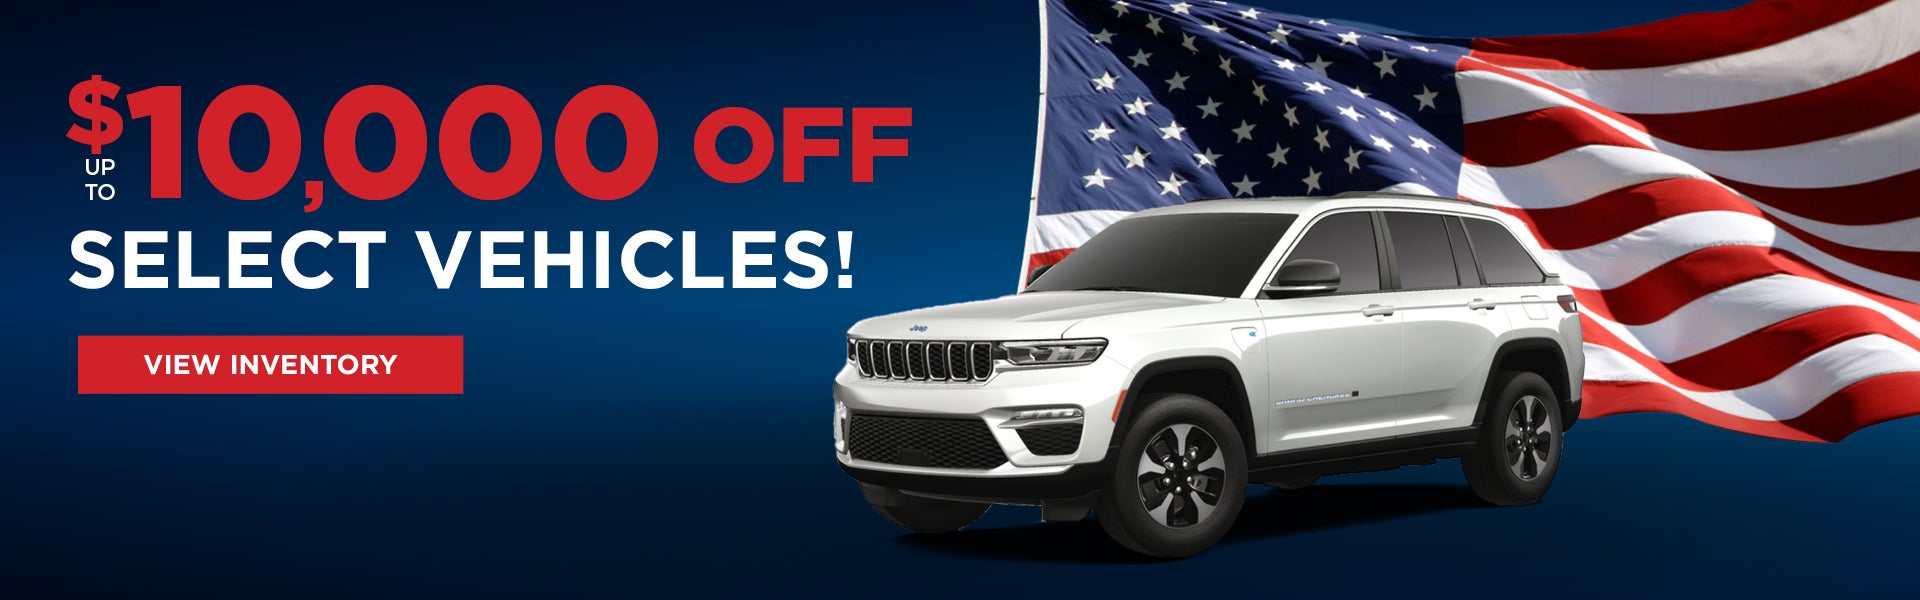 Up to $10,000 Off Select Vehicles